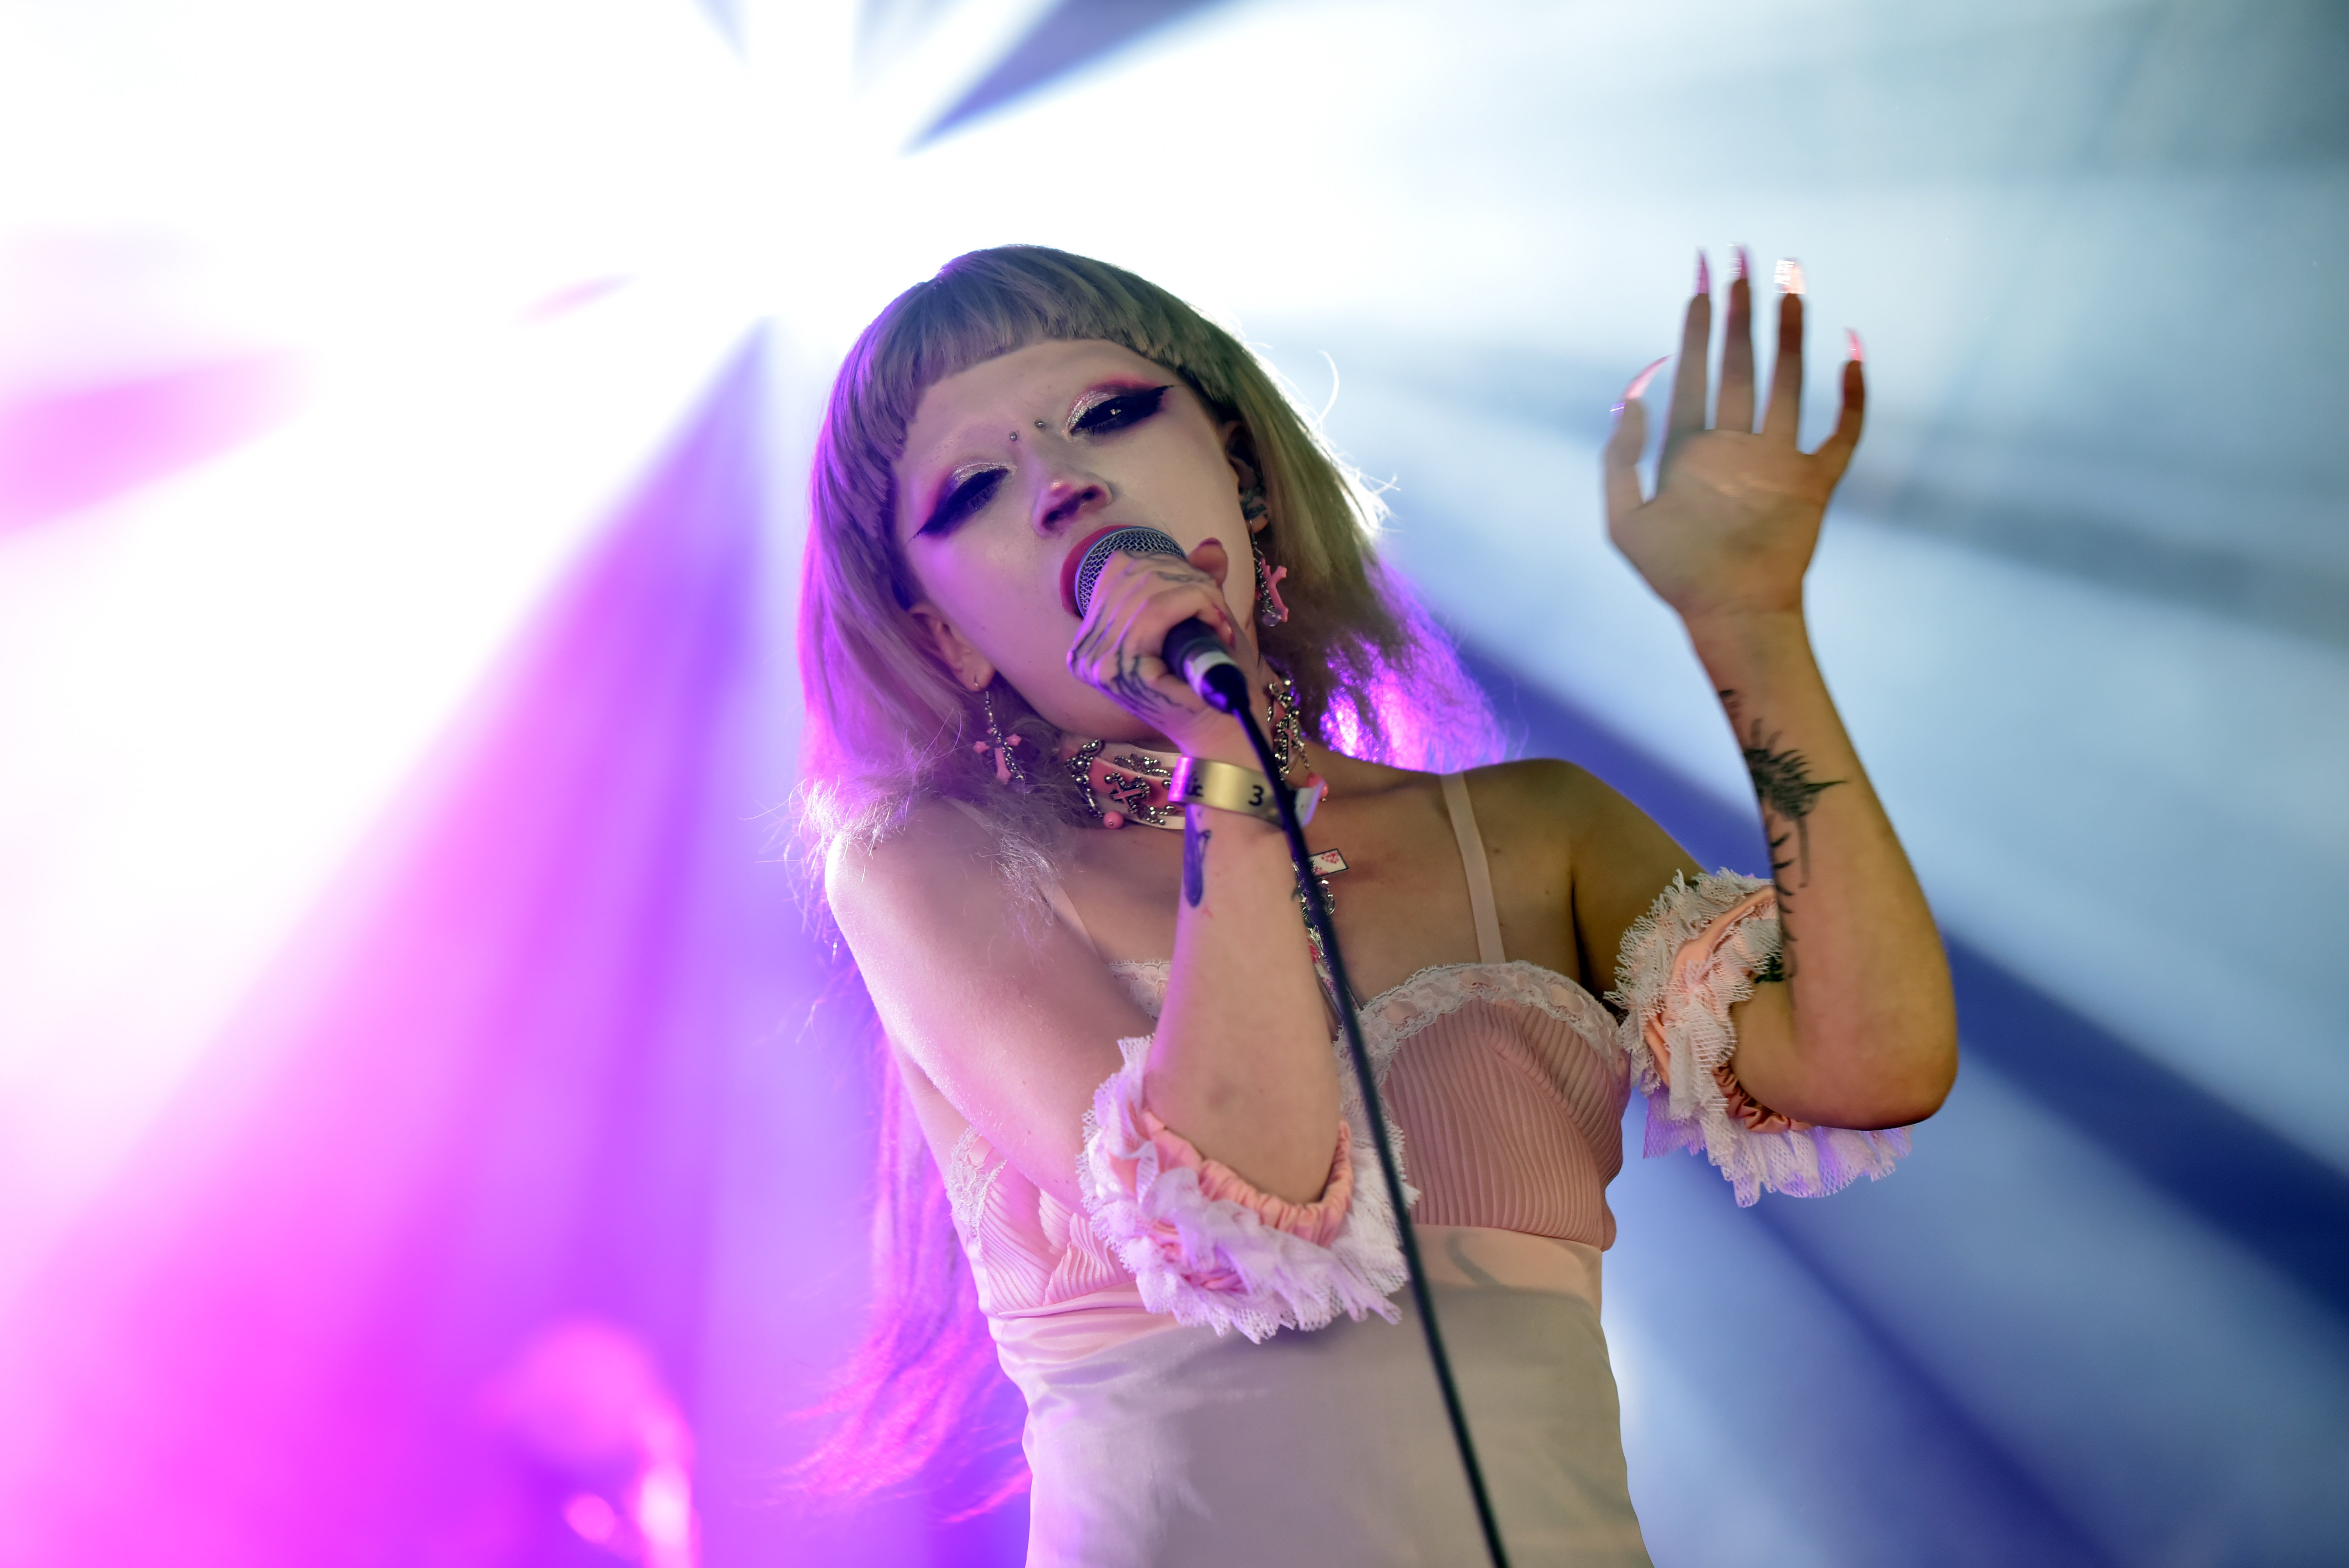 Jazmin Bean performs on stage at the Reading Festival 2021 at Richfield Avenue on August 28, 2021, in Reading, England. | Source: Getty Images